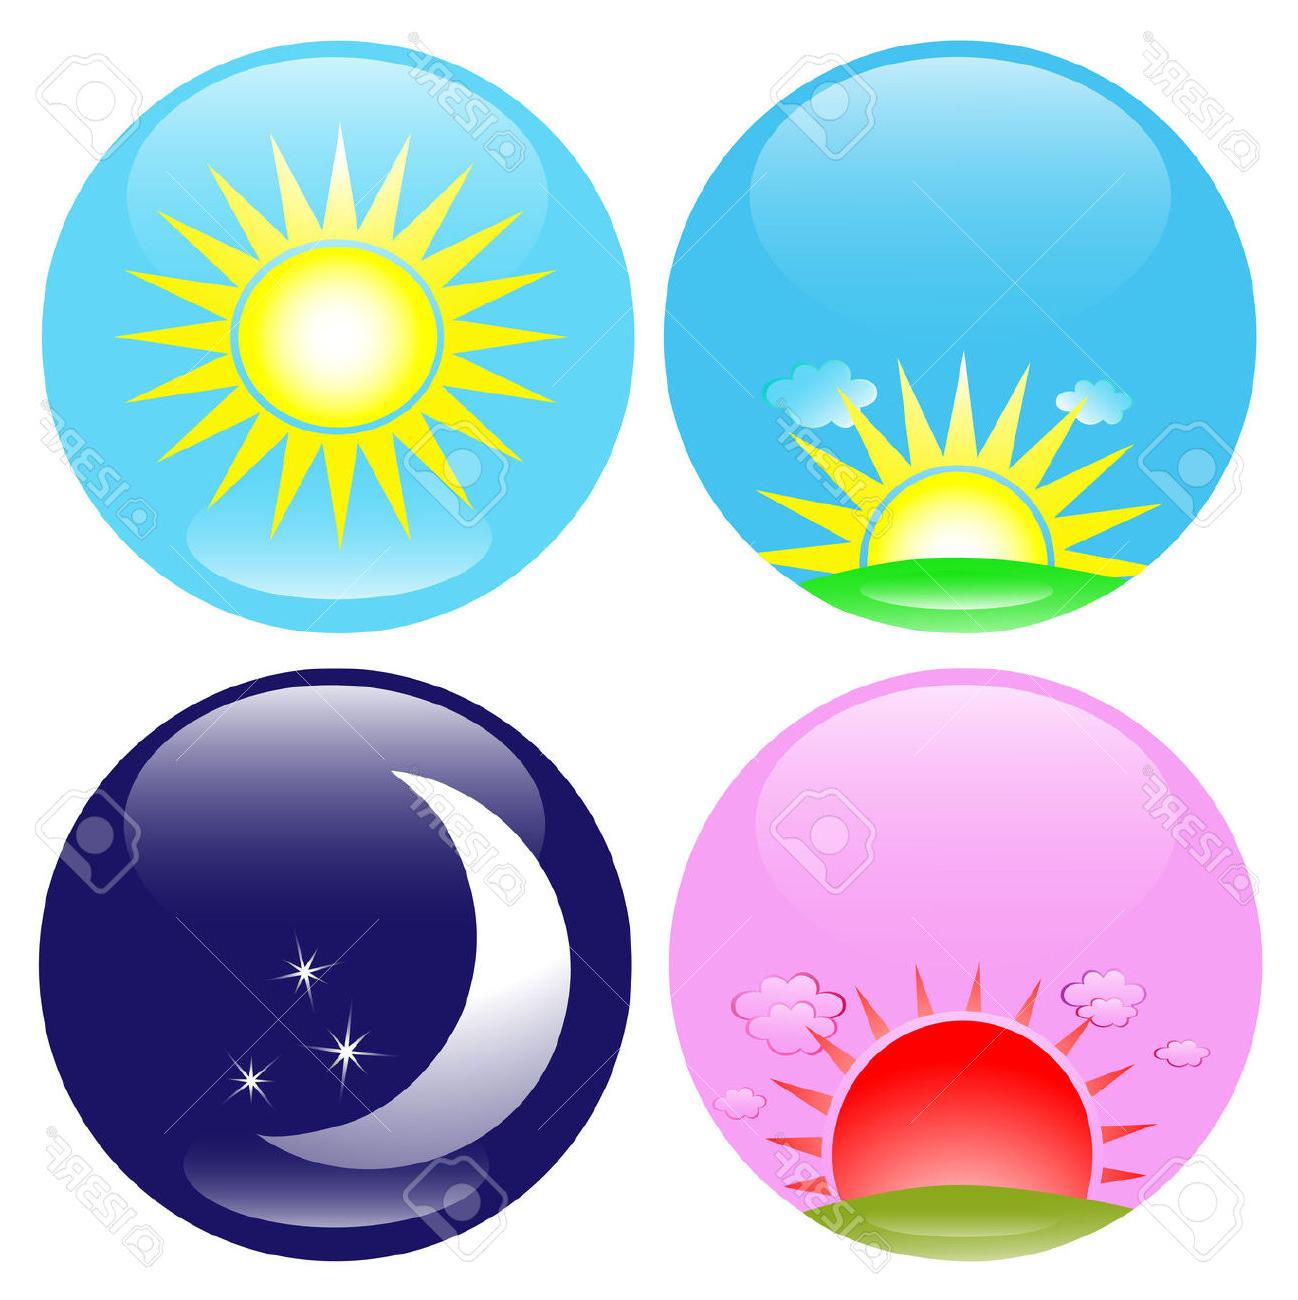 Best HD Clip Art Day And Night Vector Pictures » Free Vector Art.